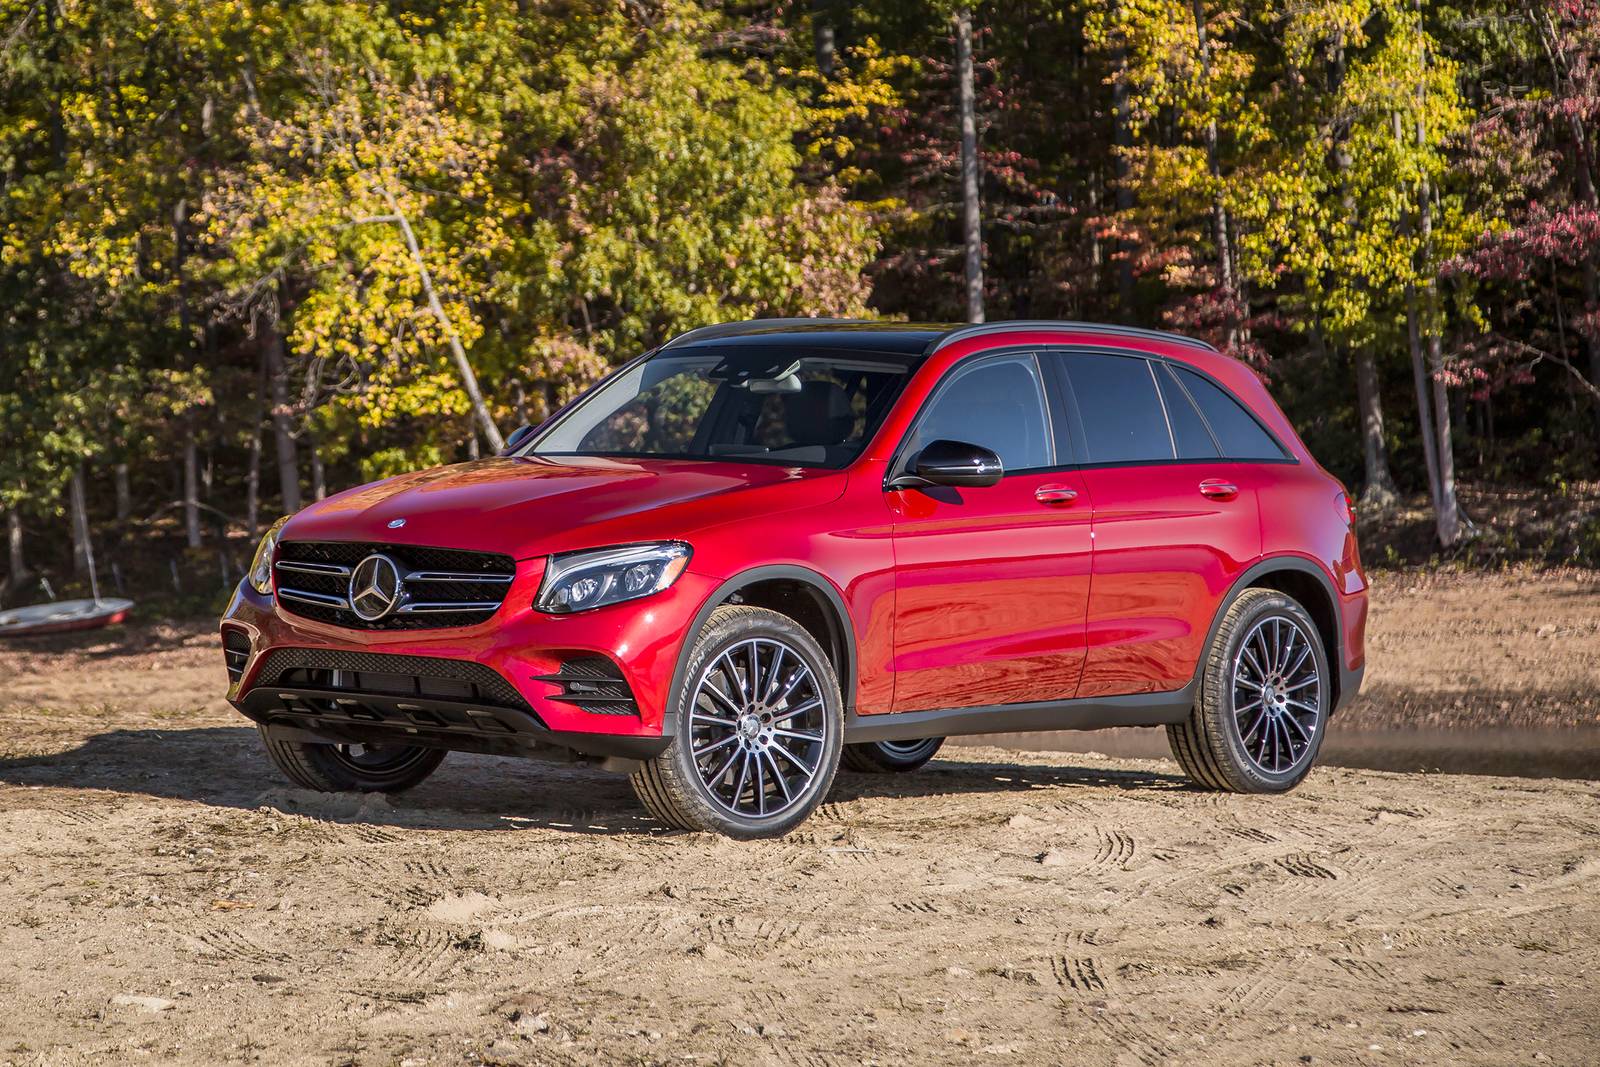 Used 2018 Mercedes-Benz GLC-Class Hybrid Review | Edmunds